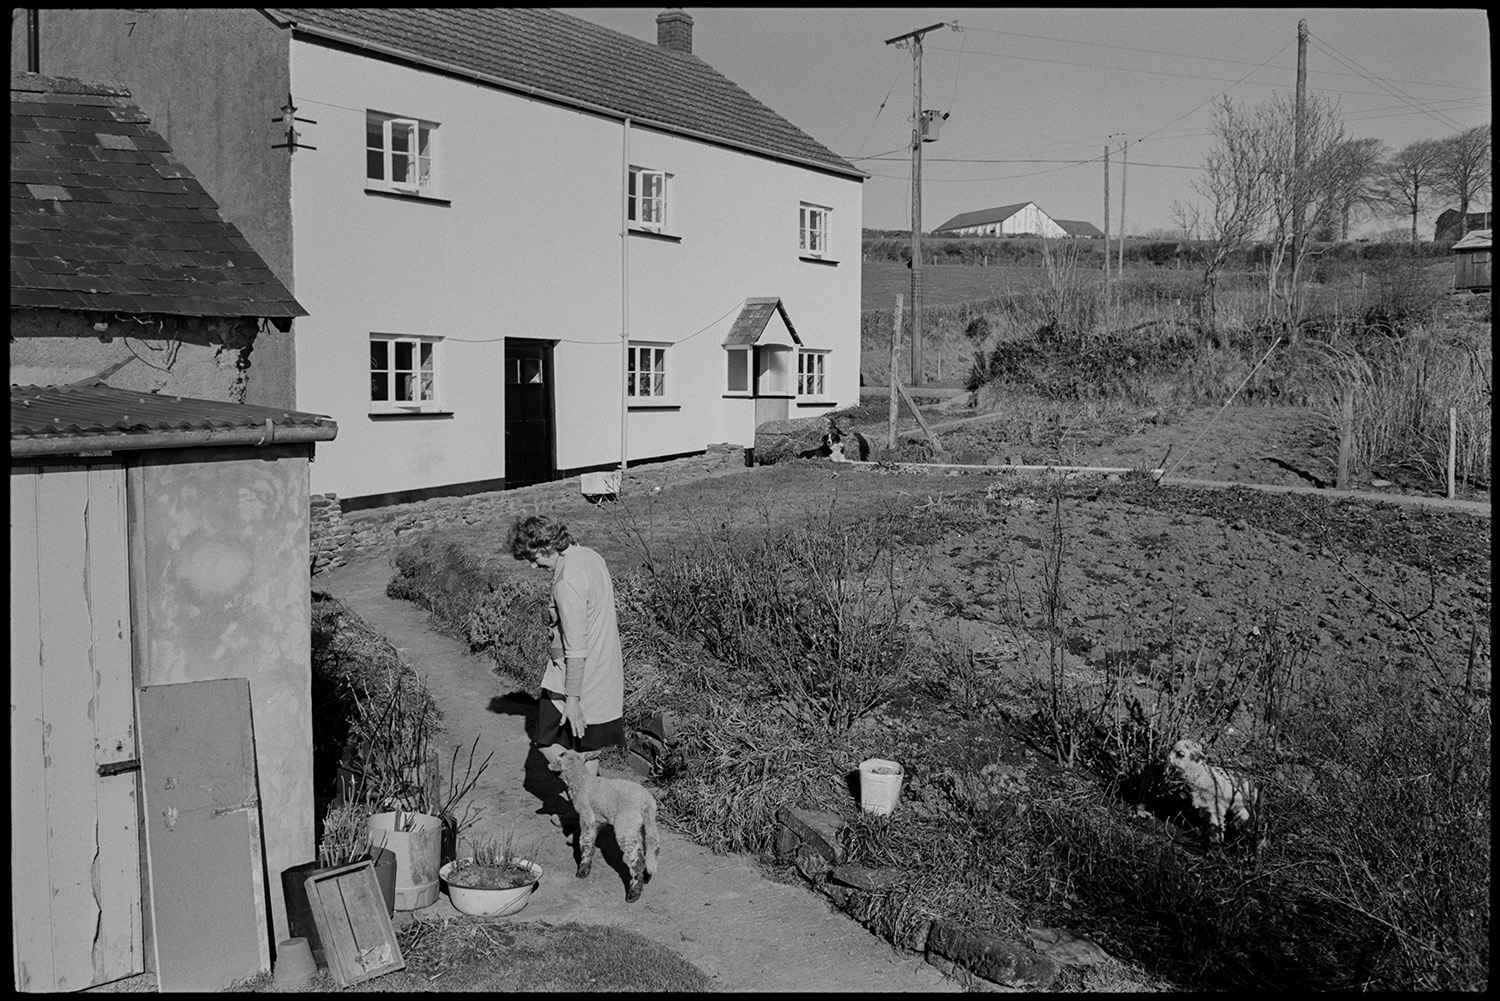 Farmhouse with sheep, farmers wife with lambs in garden. 
[Mrs Bourne leading a lamb along the garden path at Jeffrys, Beaford, also known as Mill Road Farm. Another lamb is in the foliage in the foreground. The farmhouse an a dog can be seen in the background.]